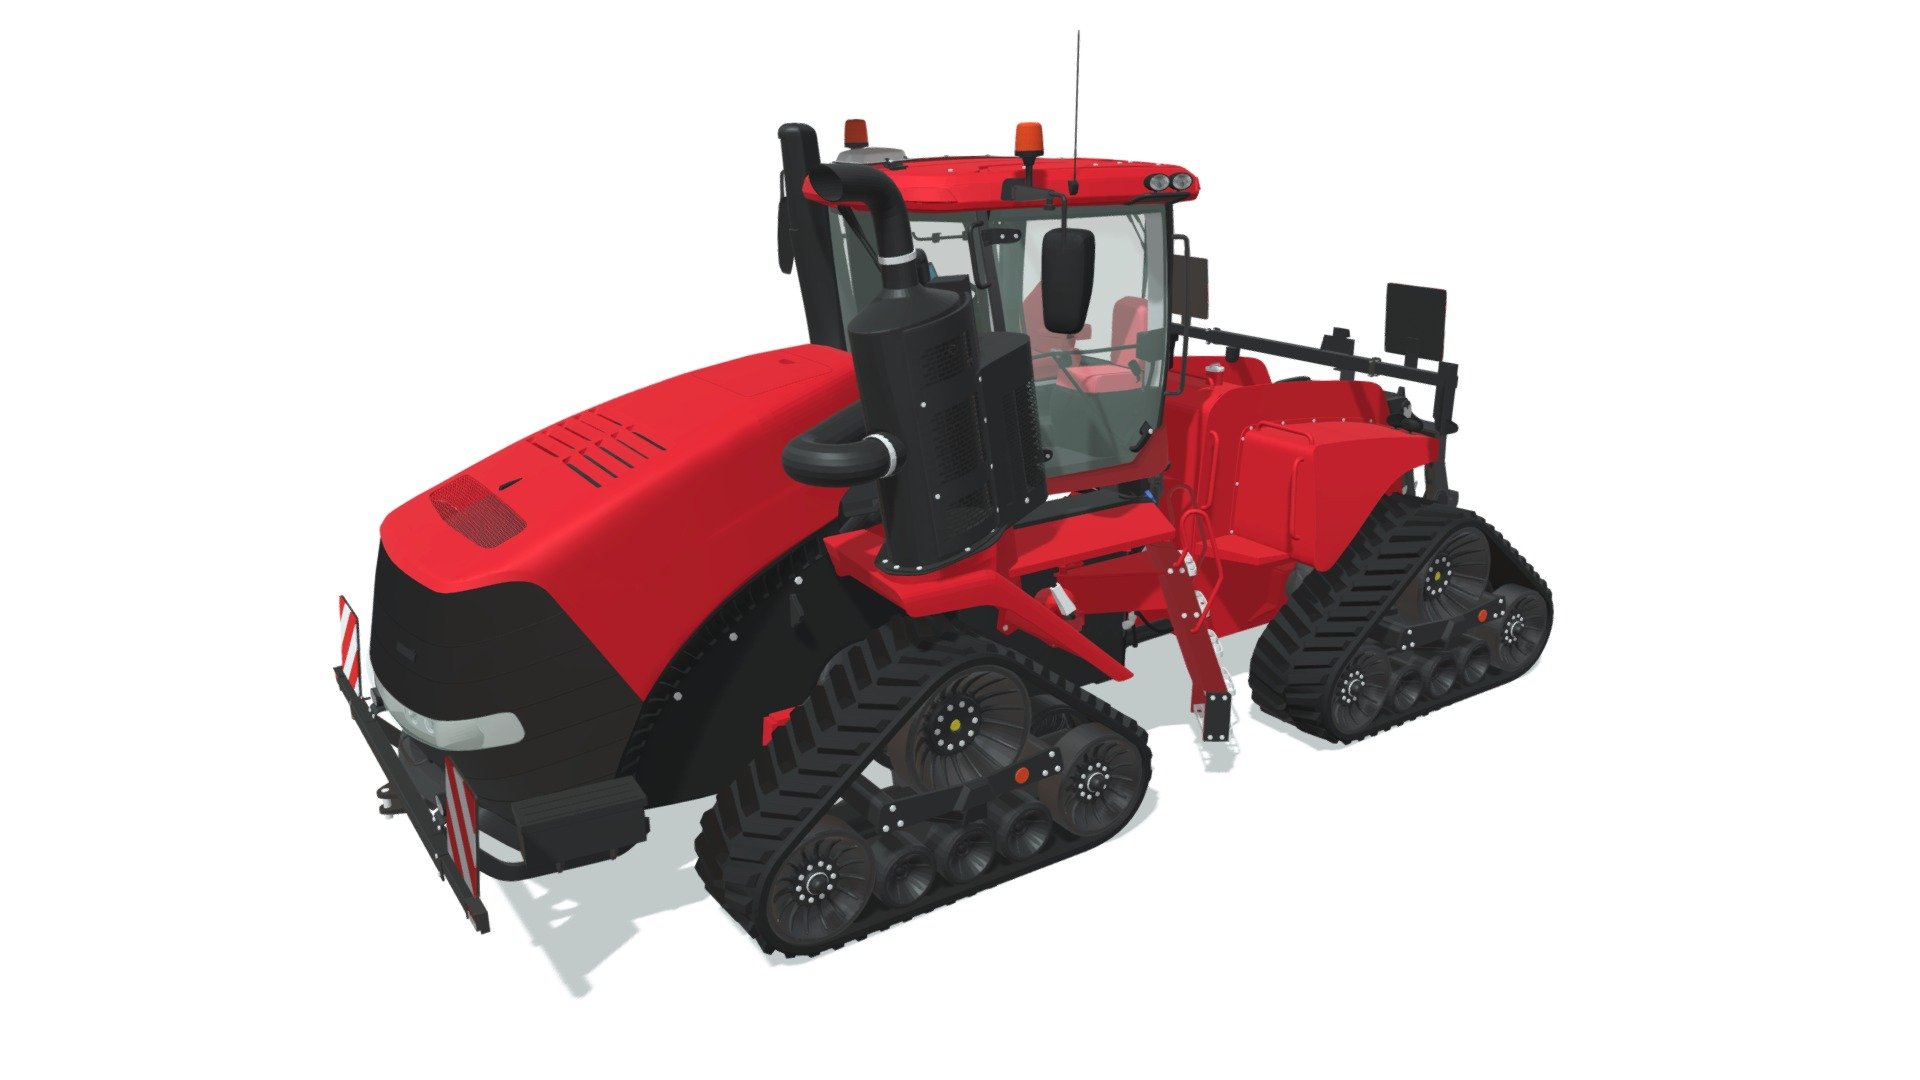 High poly 3d model of tracked articulated tractor.
Based on real tractor 3d model